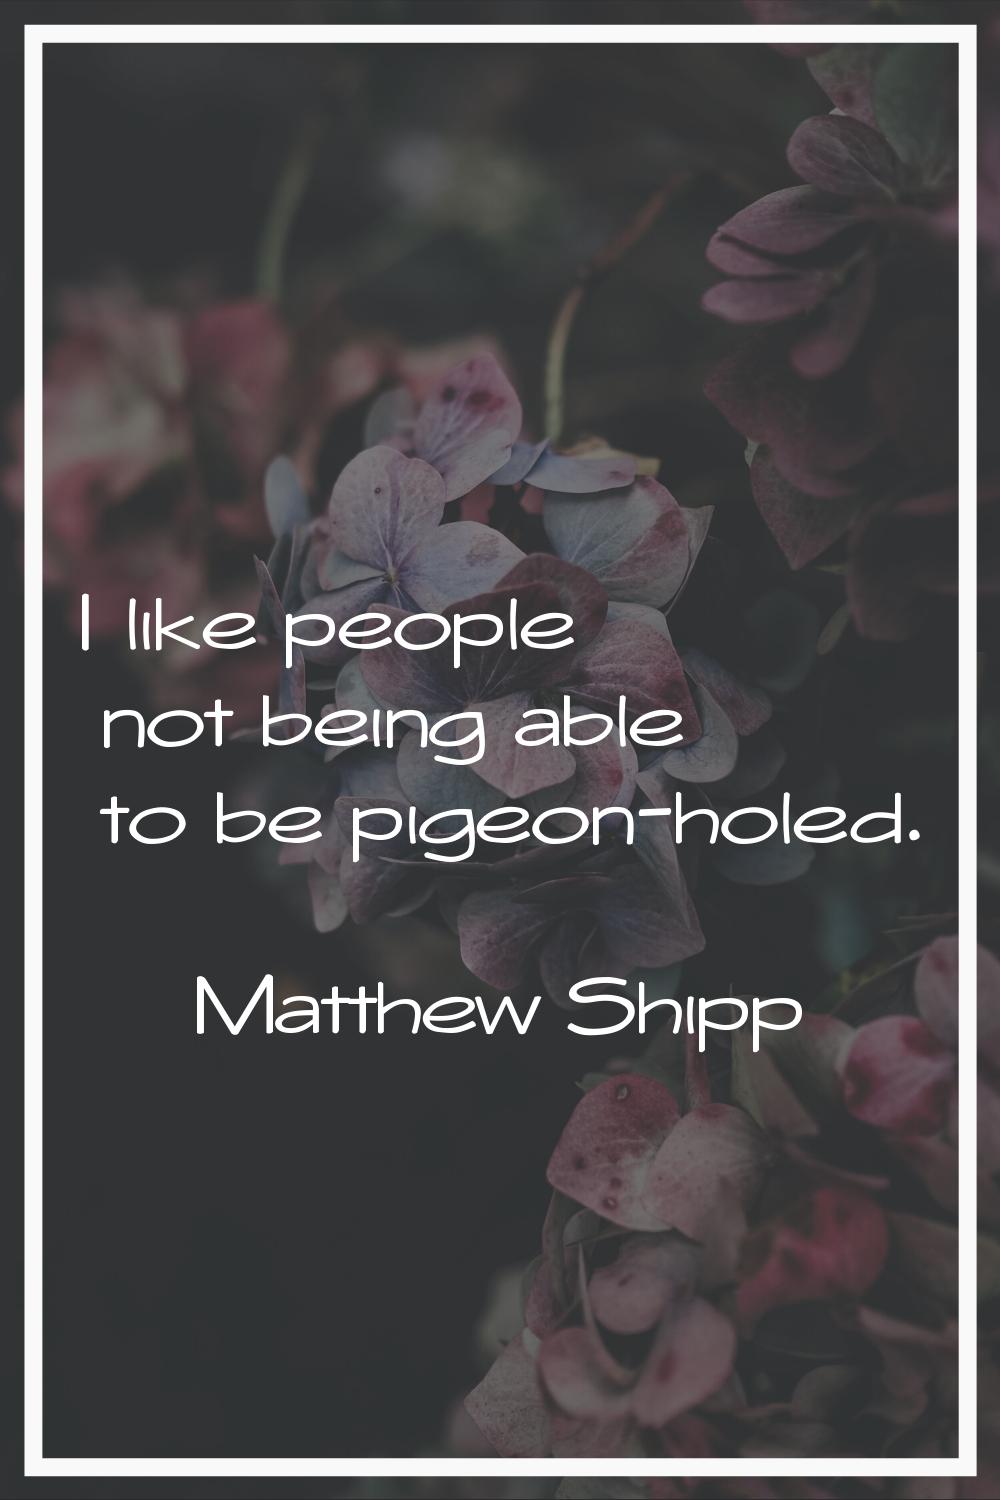 I like people not being able to be pigeon-holed.